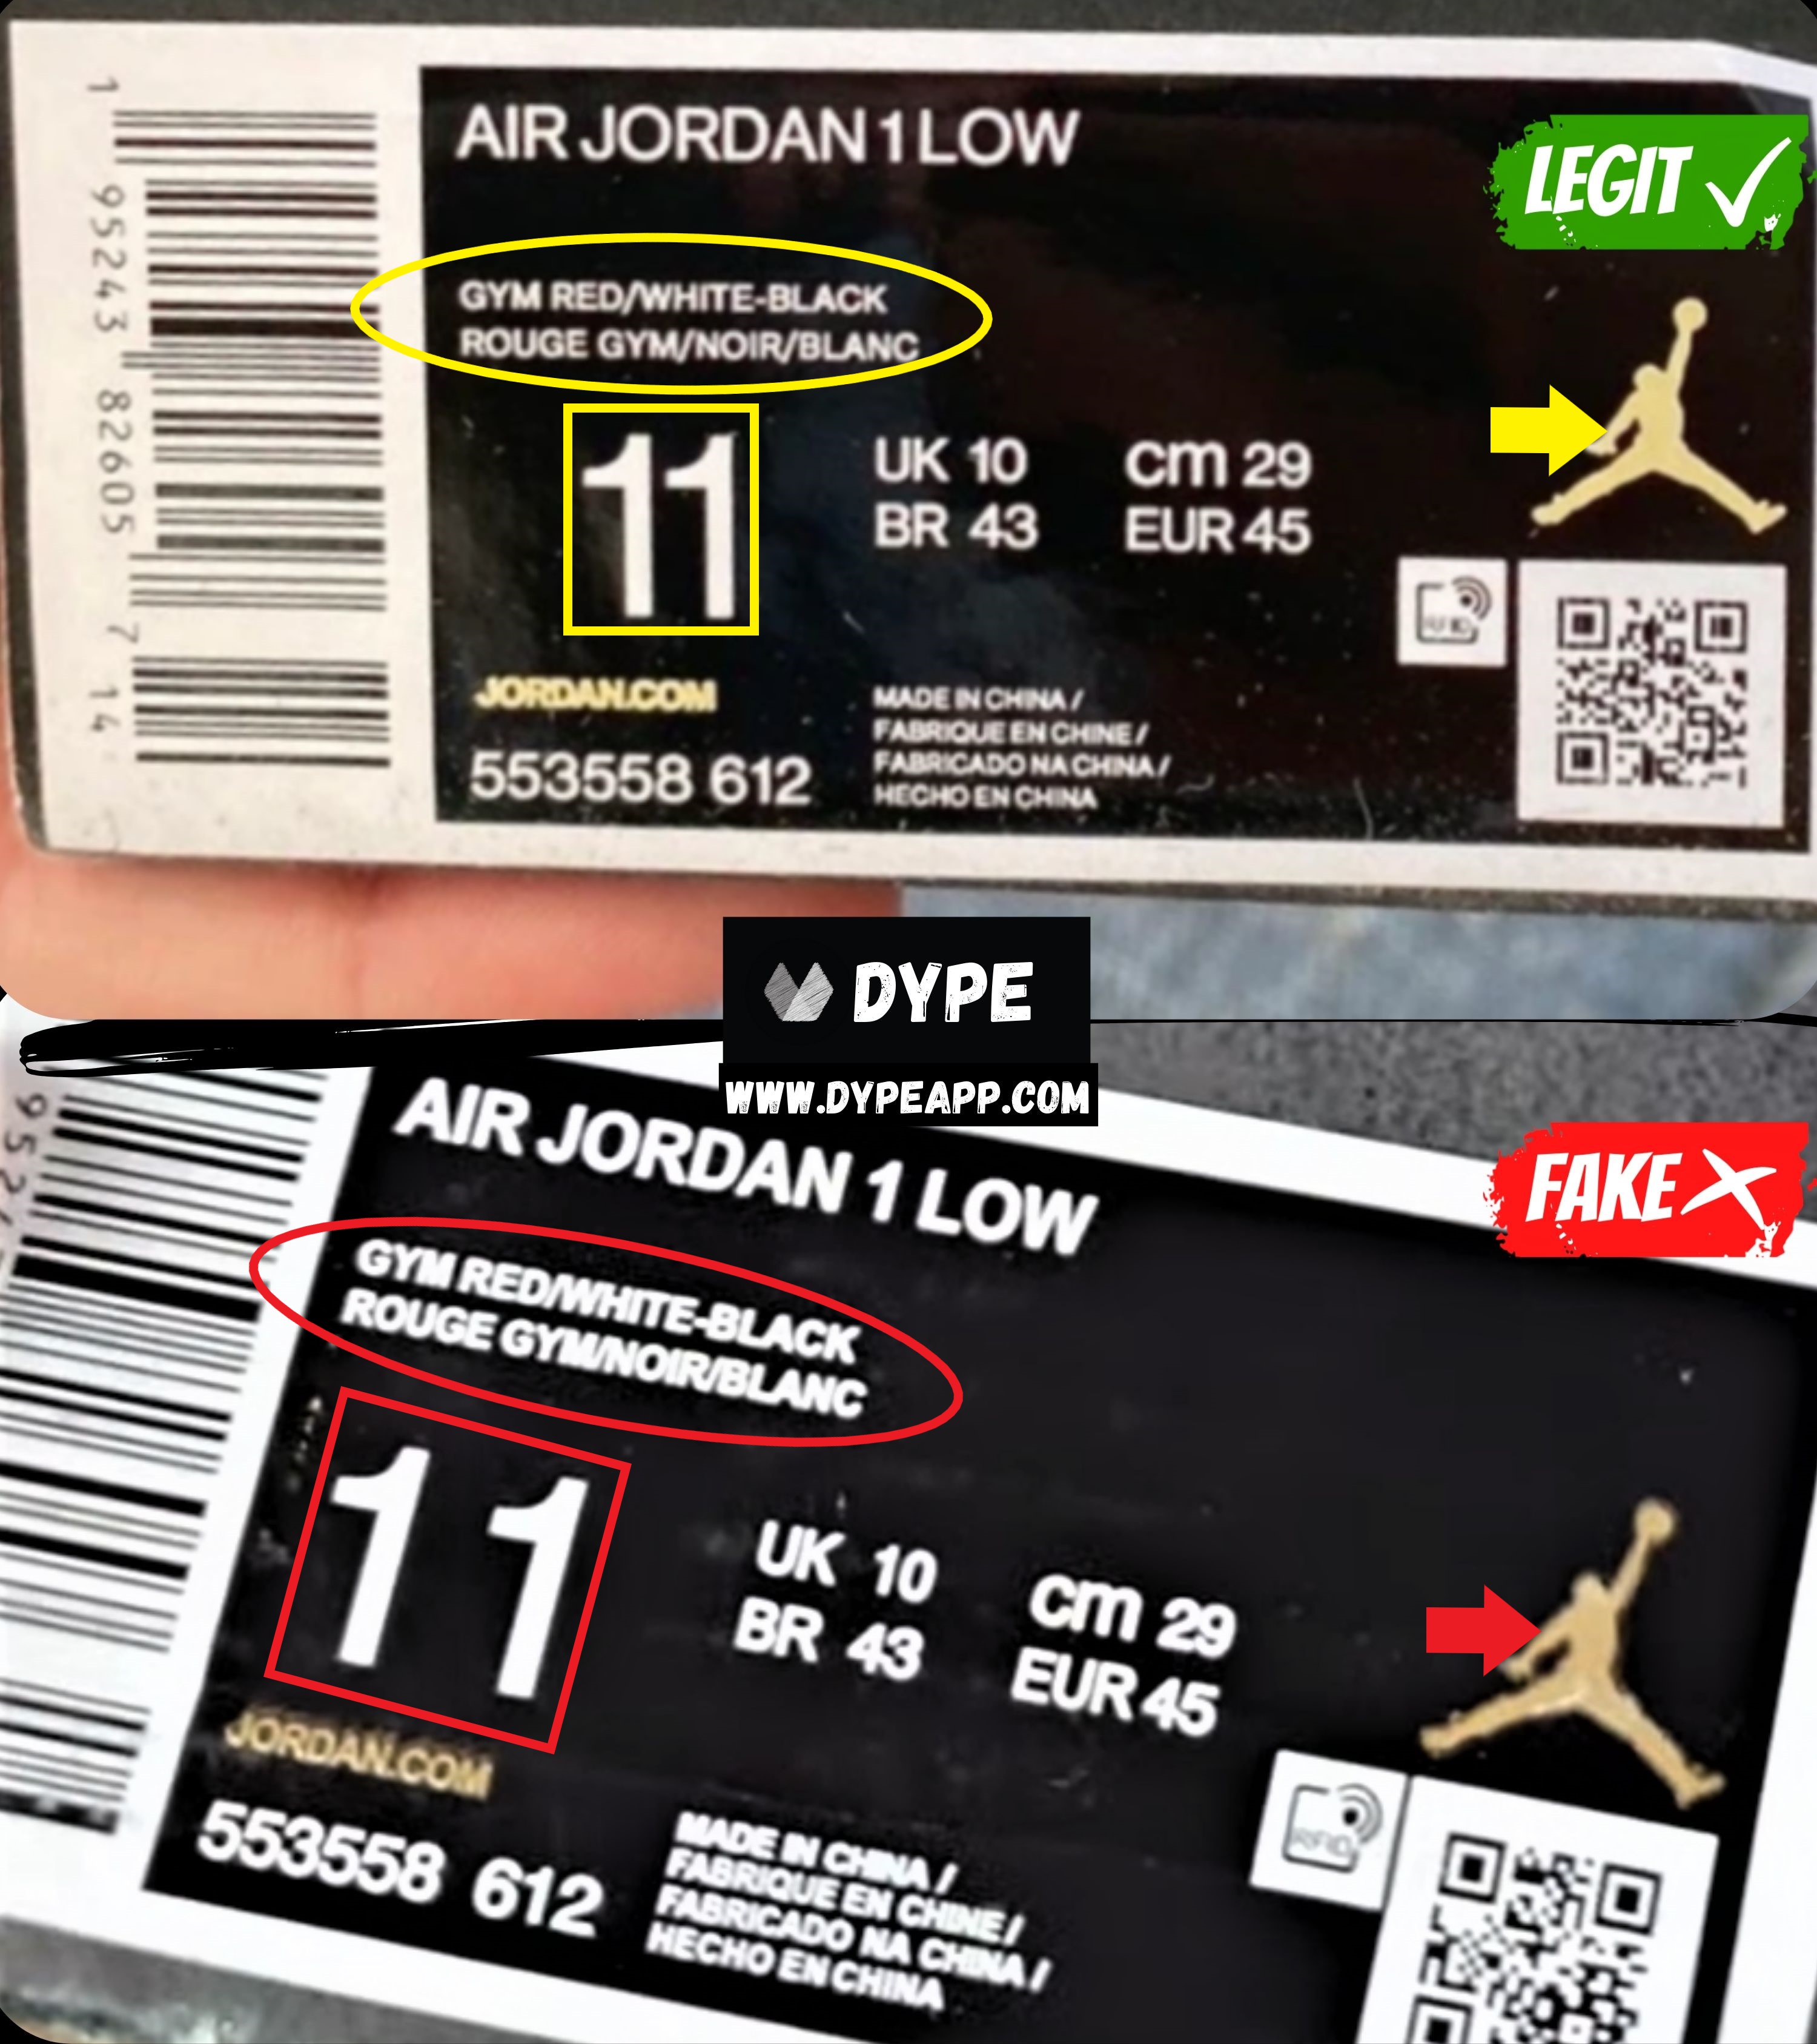 how to check air jordan 1 low authenticity